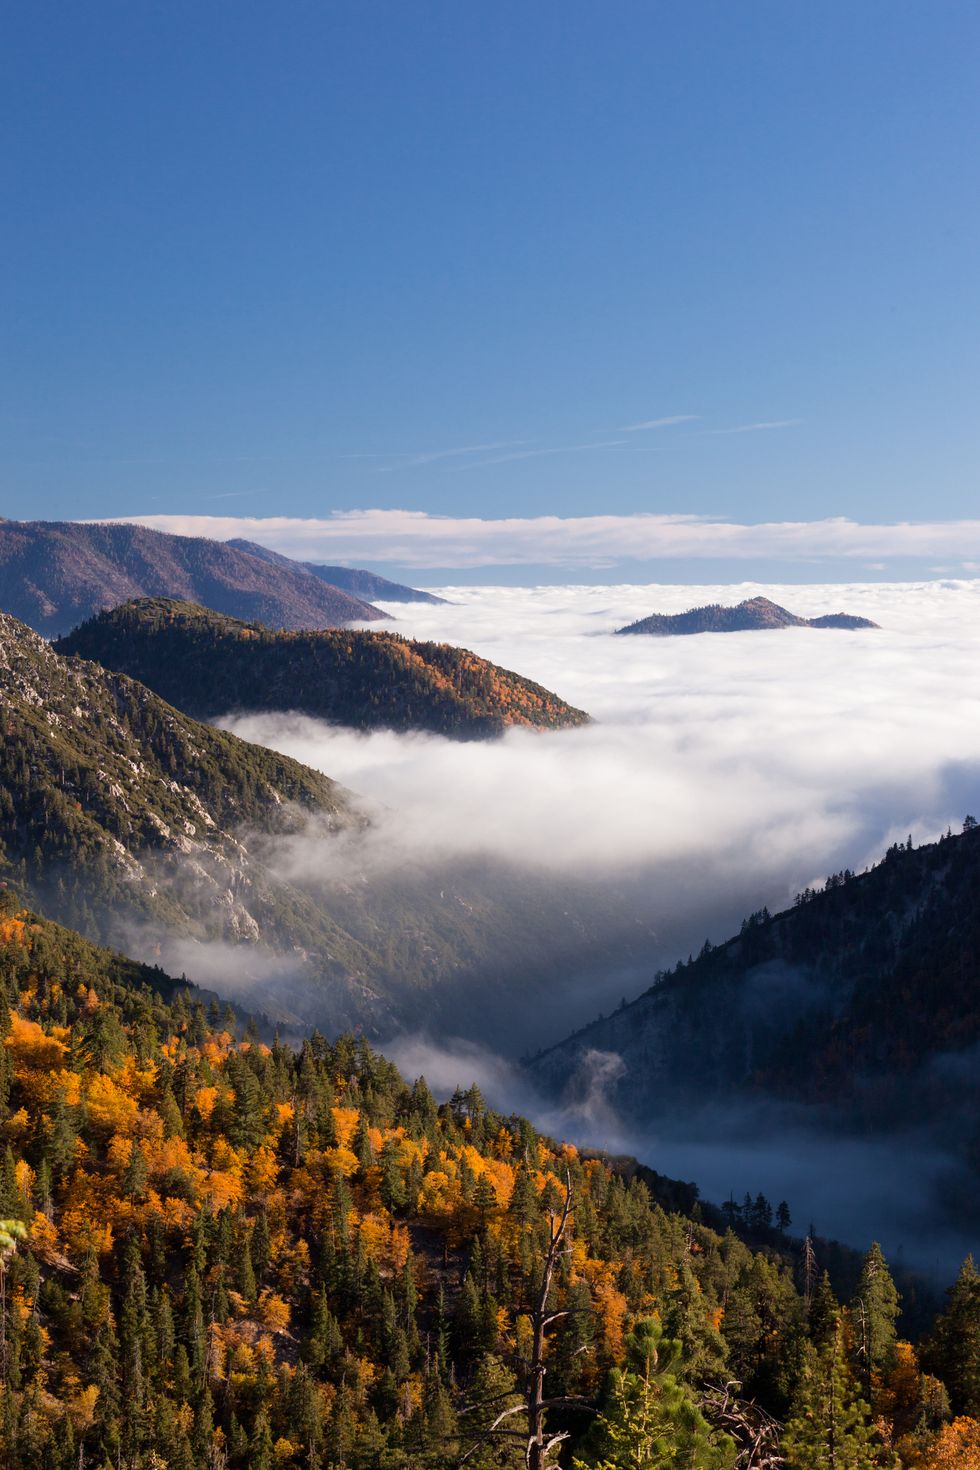 sea of clouds over big bear lake with the surrounding mountains in fall color